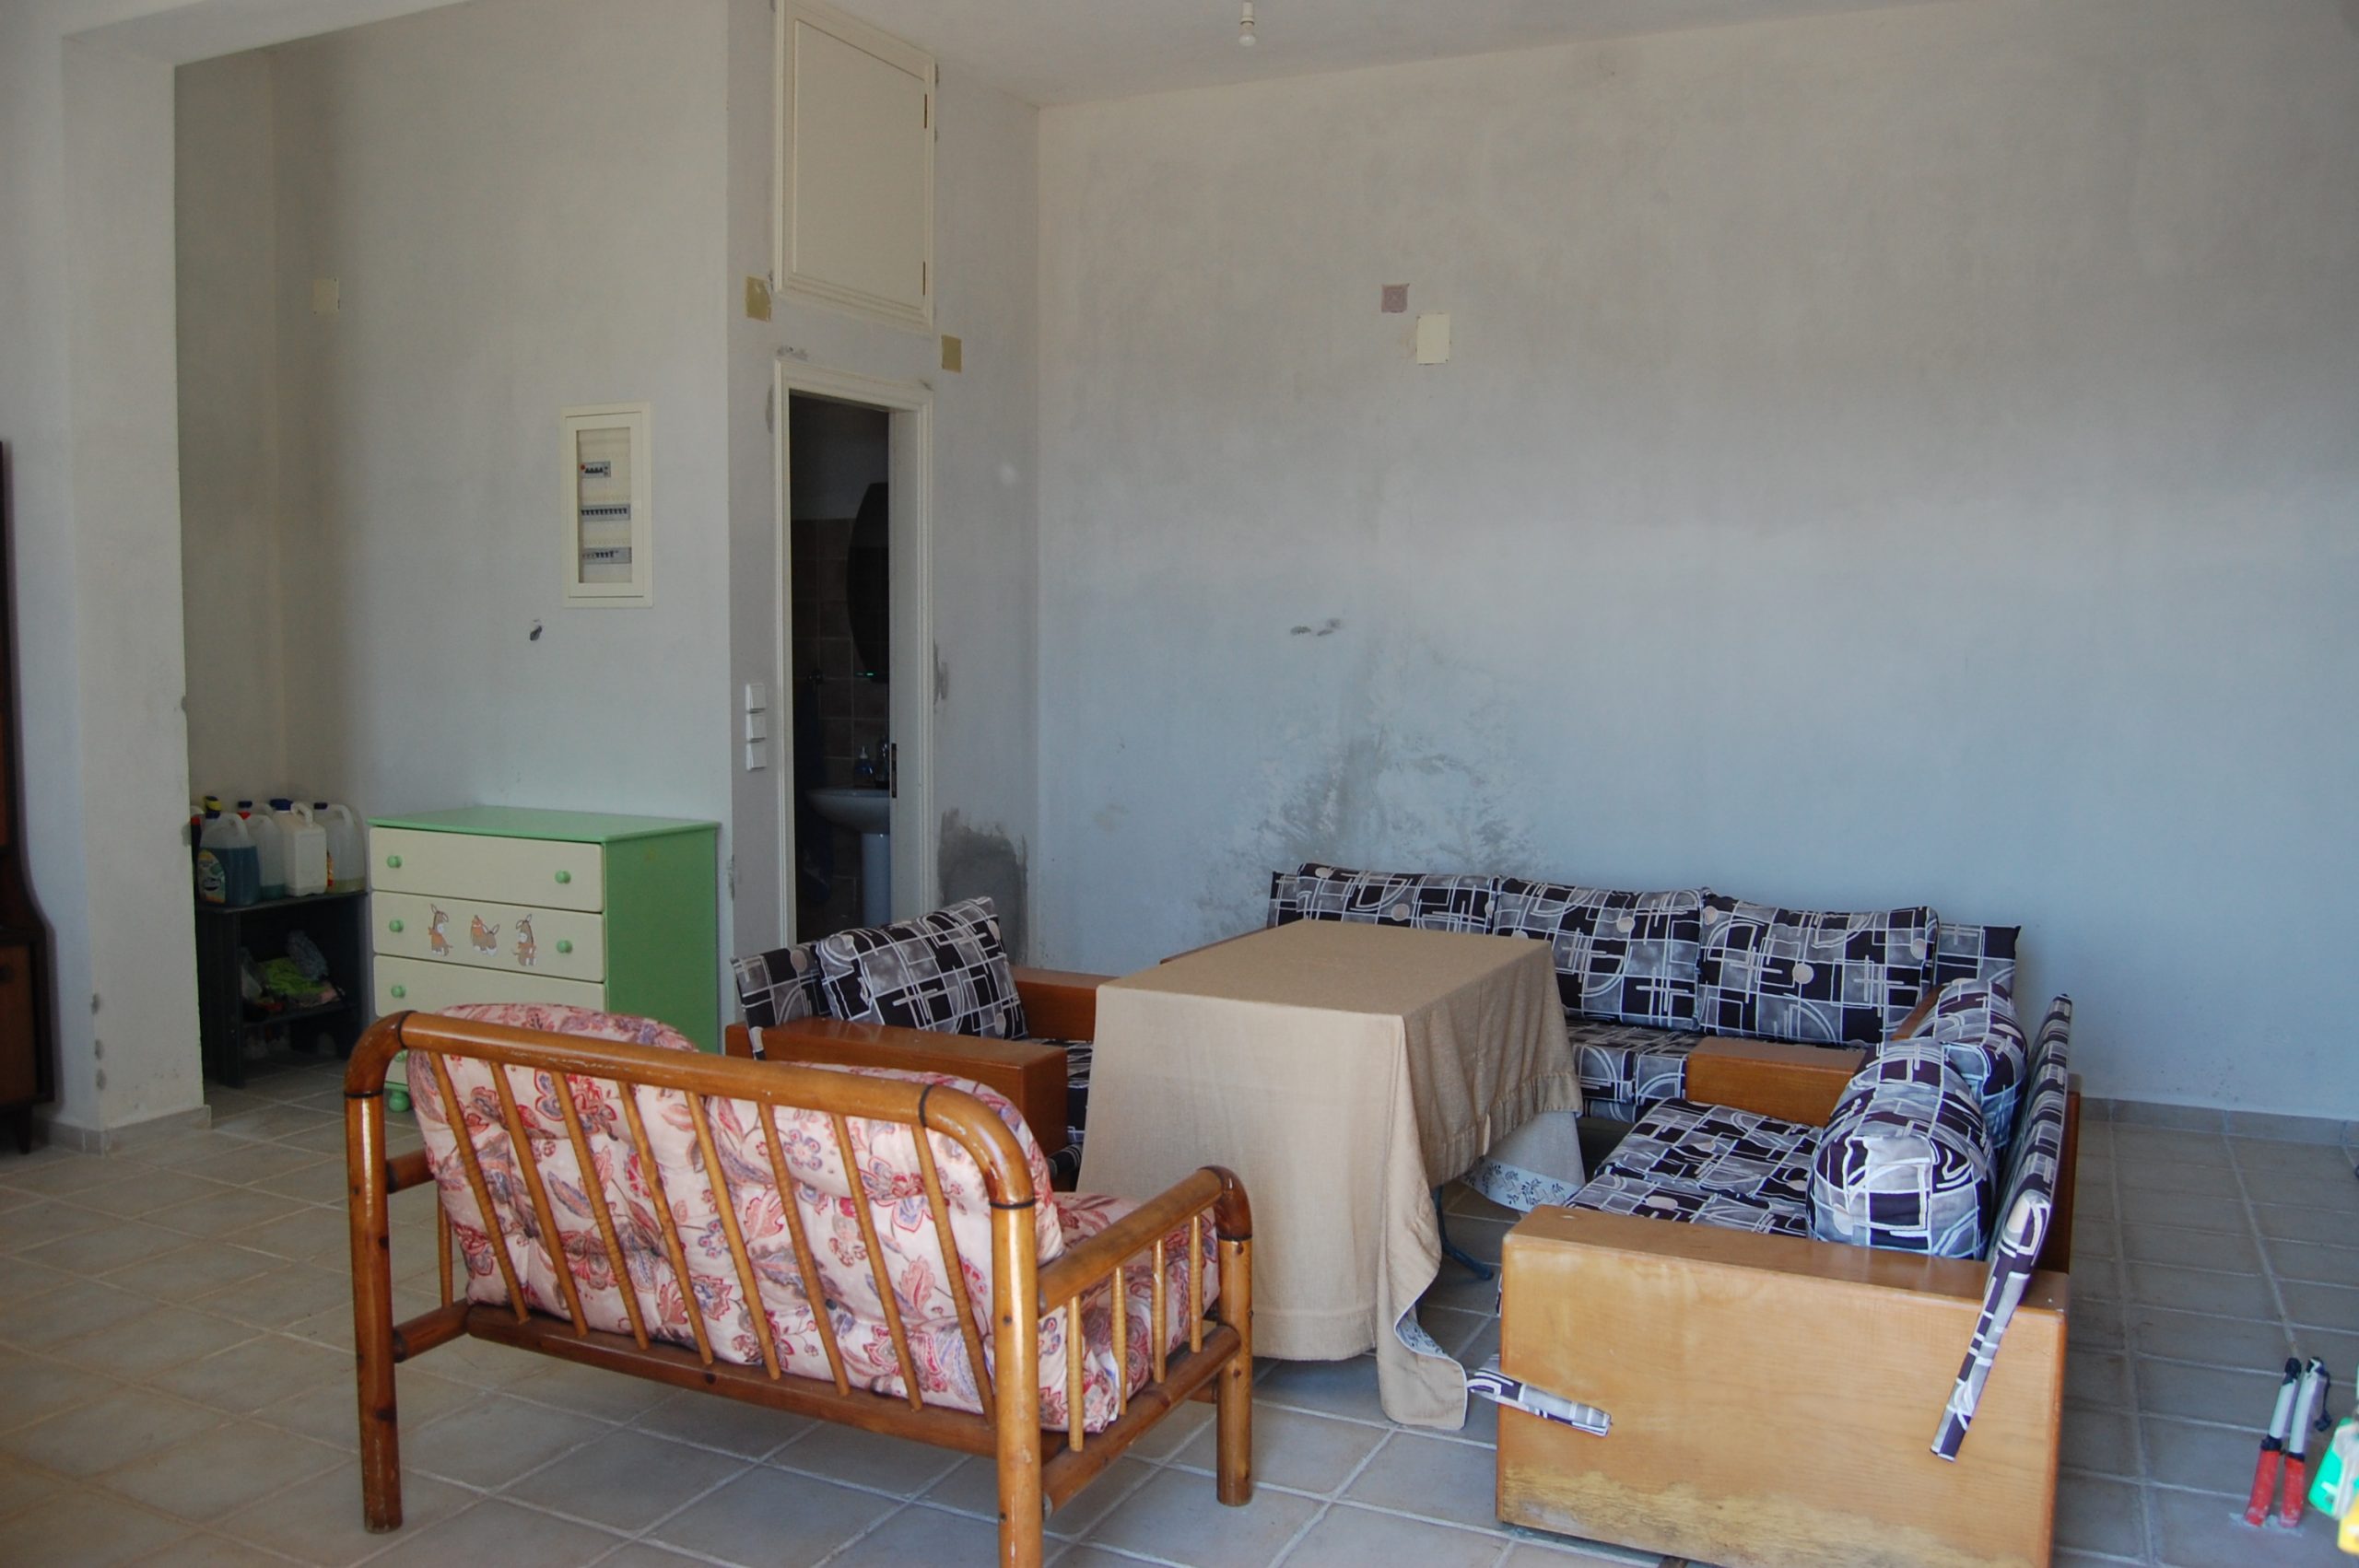 Interior of flat underneath property for sale in Ithaca Greece Perachori